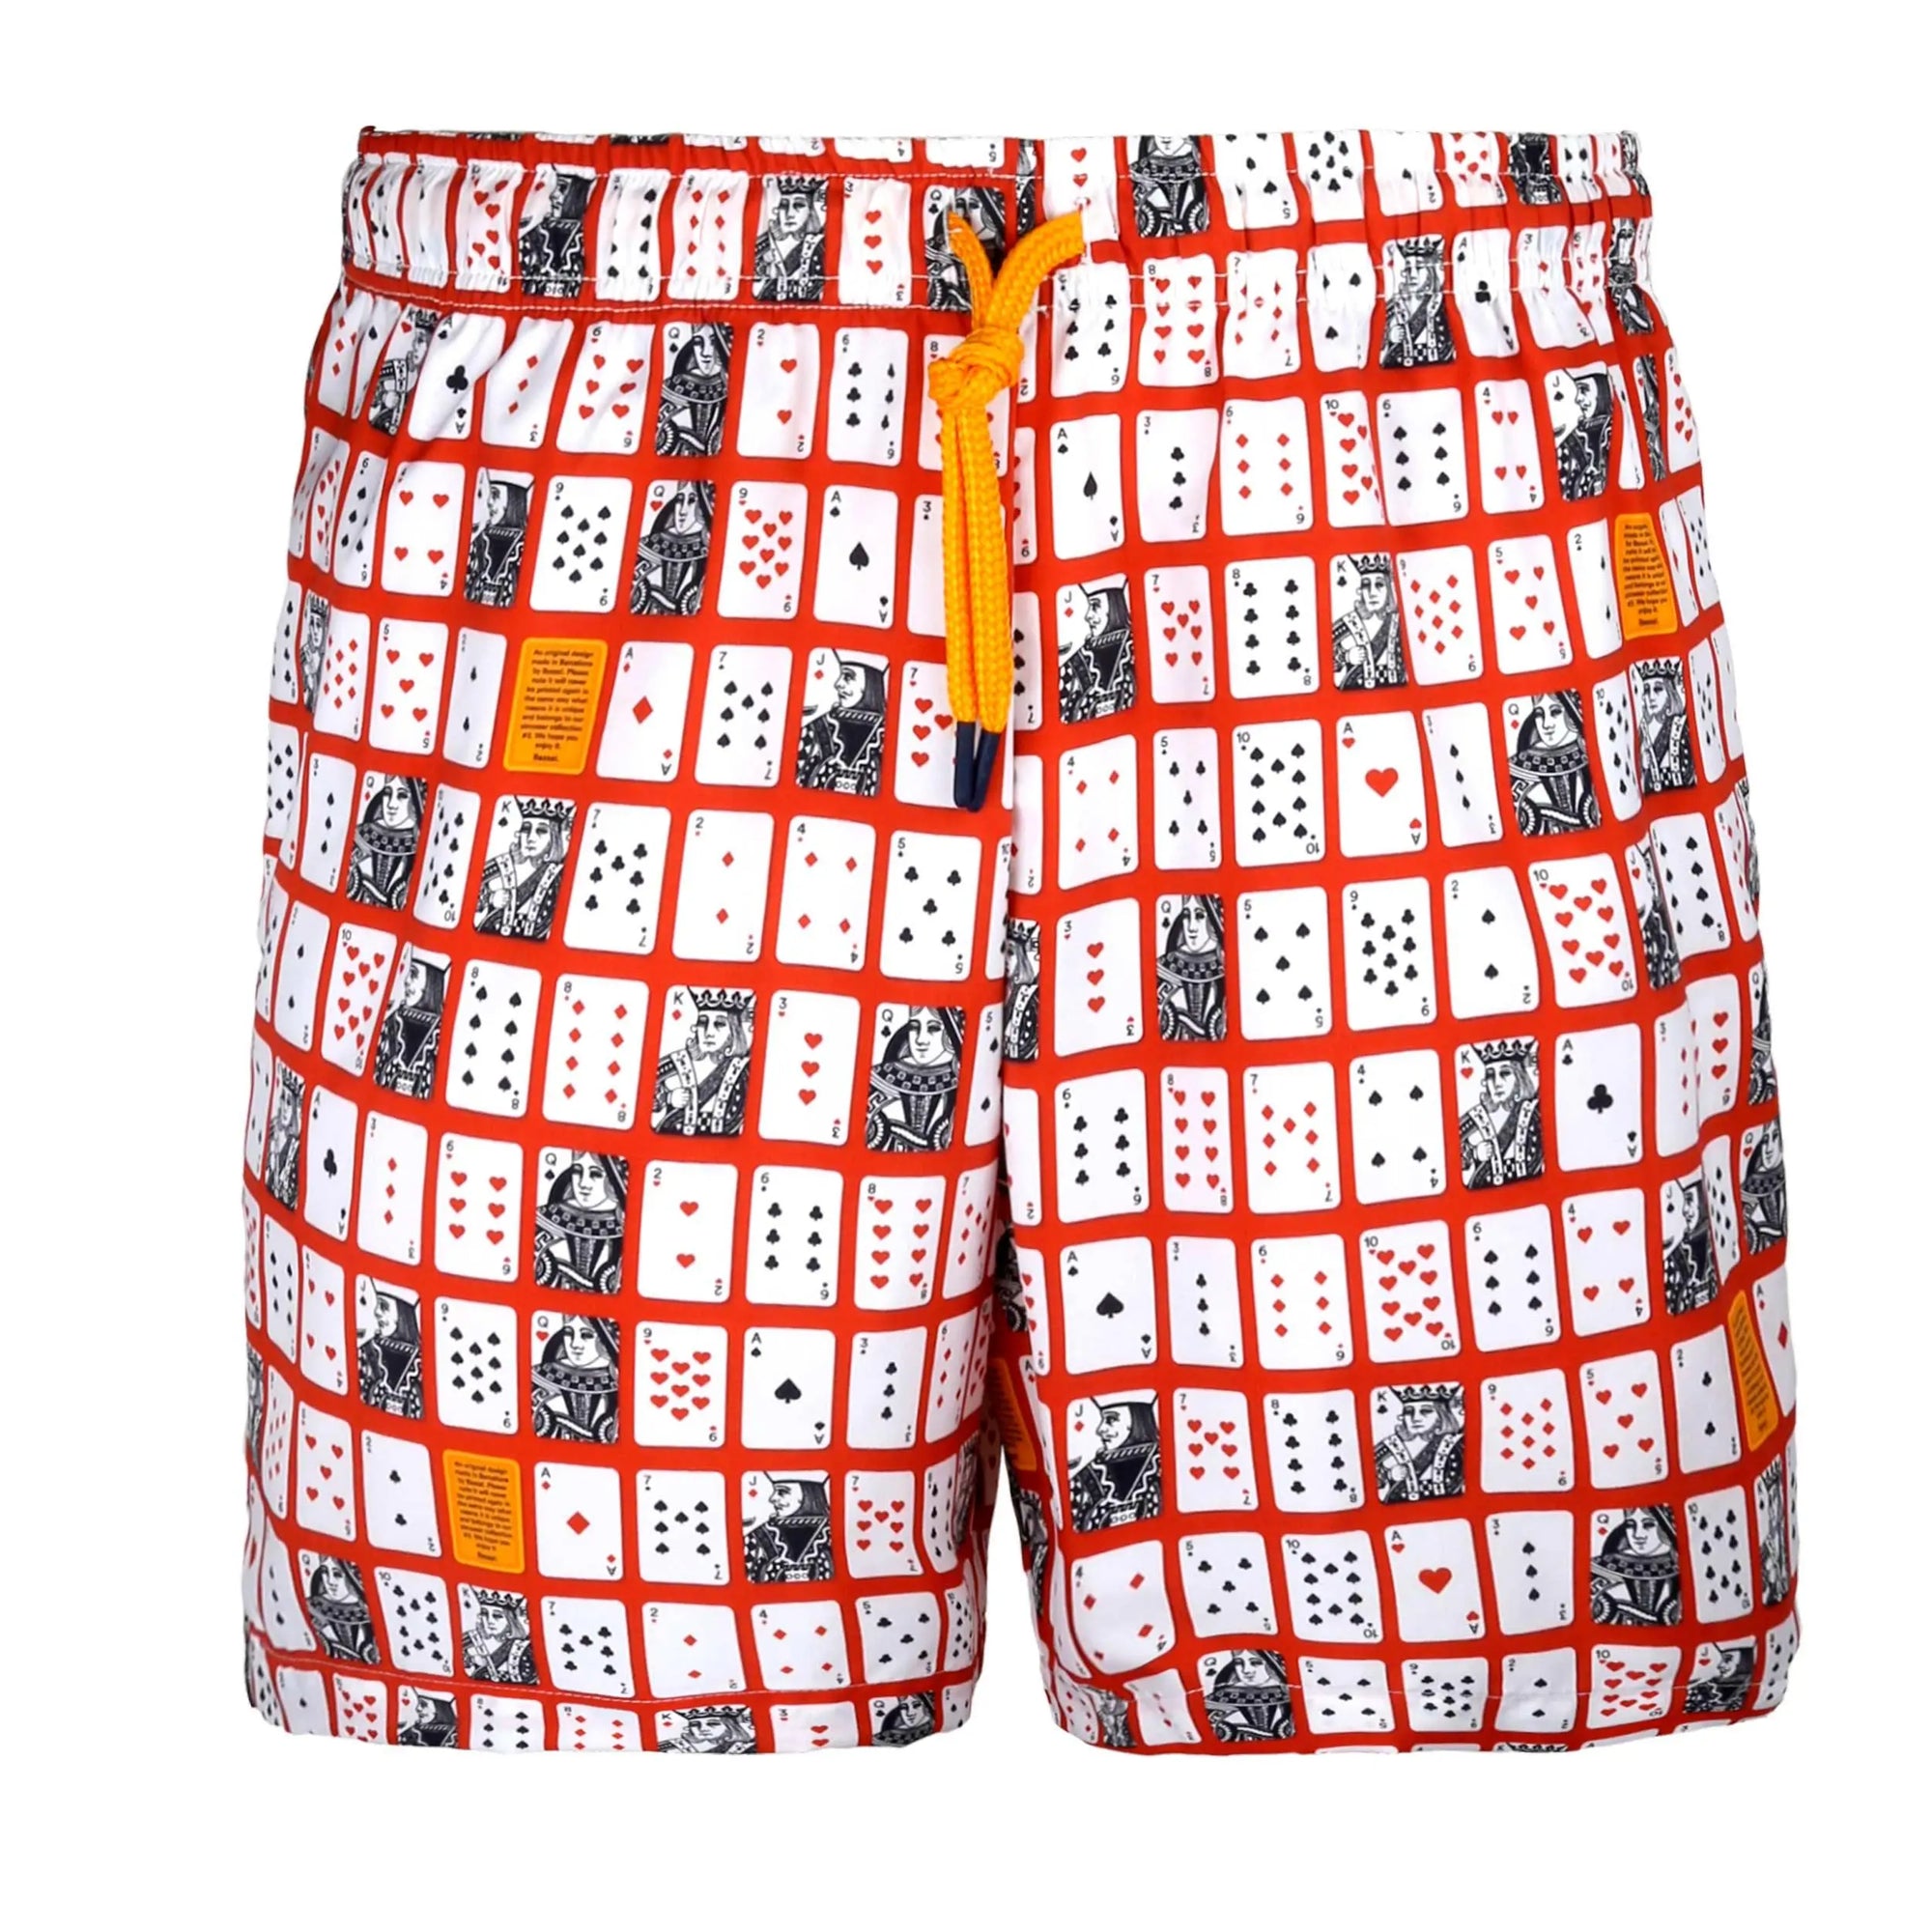 A small white box with a lid partially removed reveals a fabric bag inside. The bag, boasting a colorful playing card pattern and an orange drawstring, is from the Bassal. store in Barcelona. Attached to the bag are two tags—one blue and one white—with text including "Poker Swimwear".